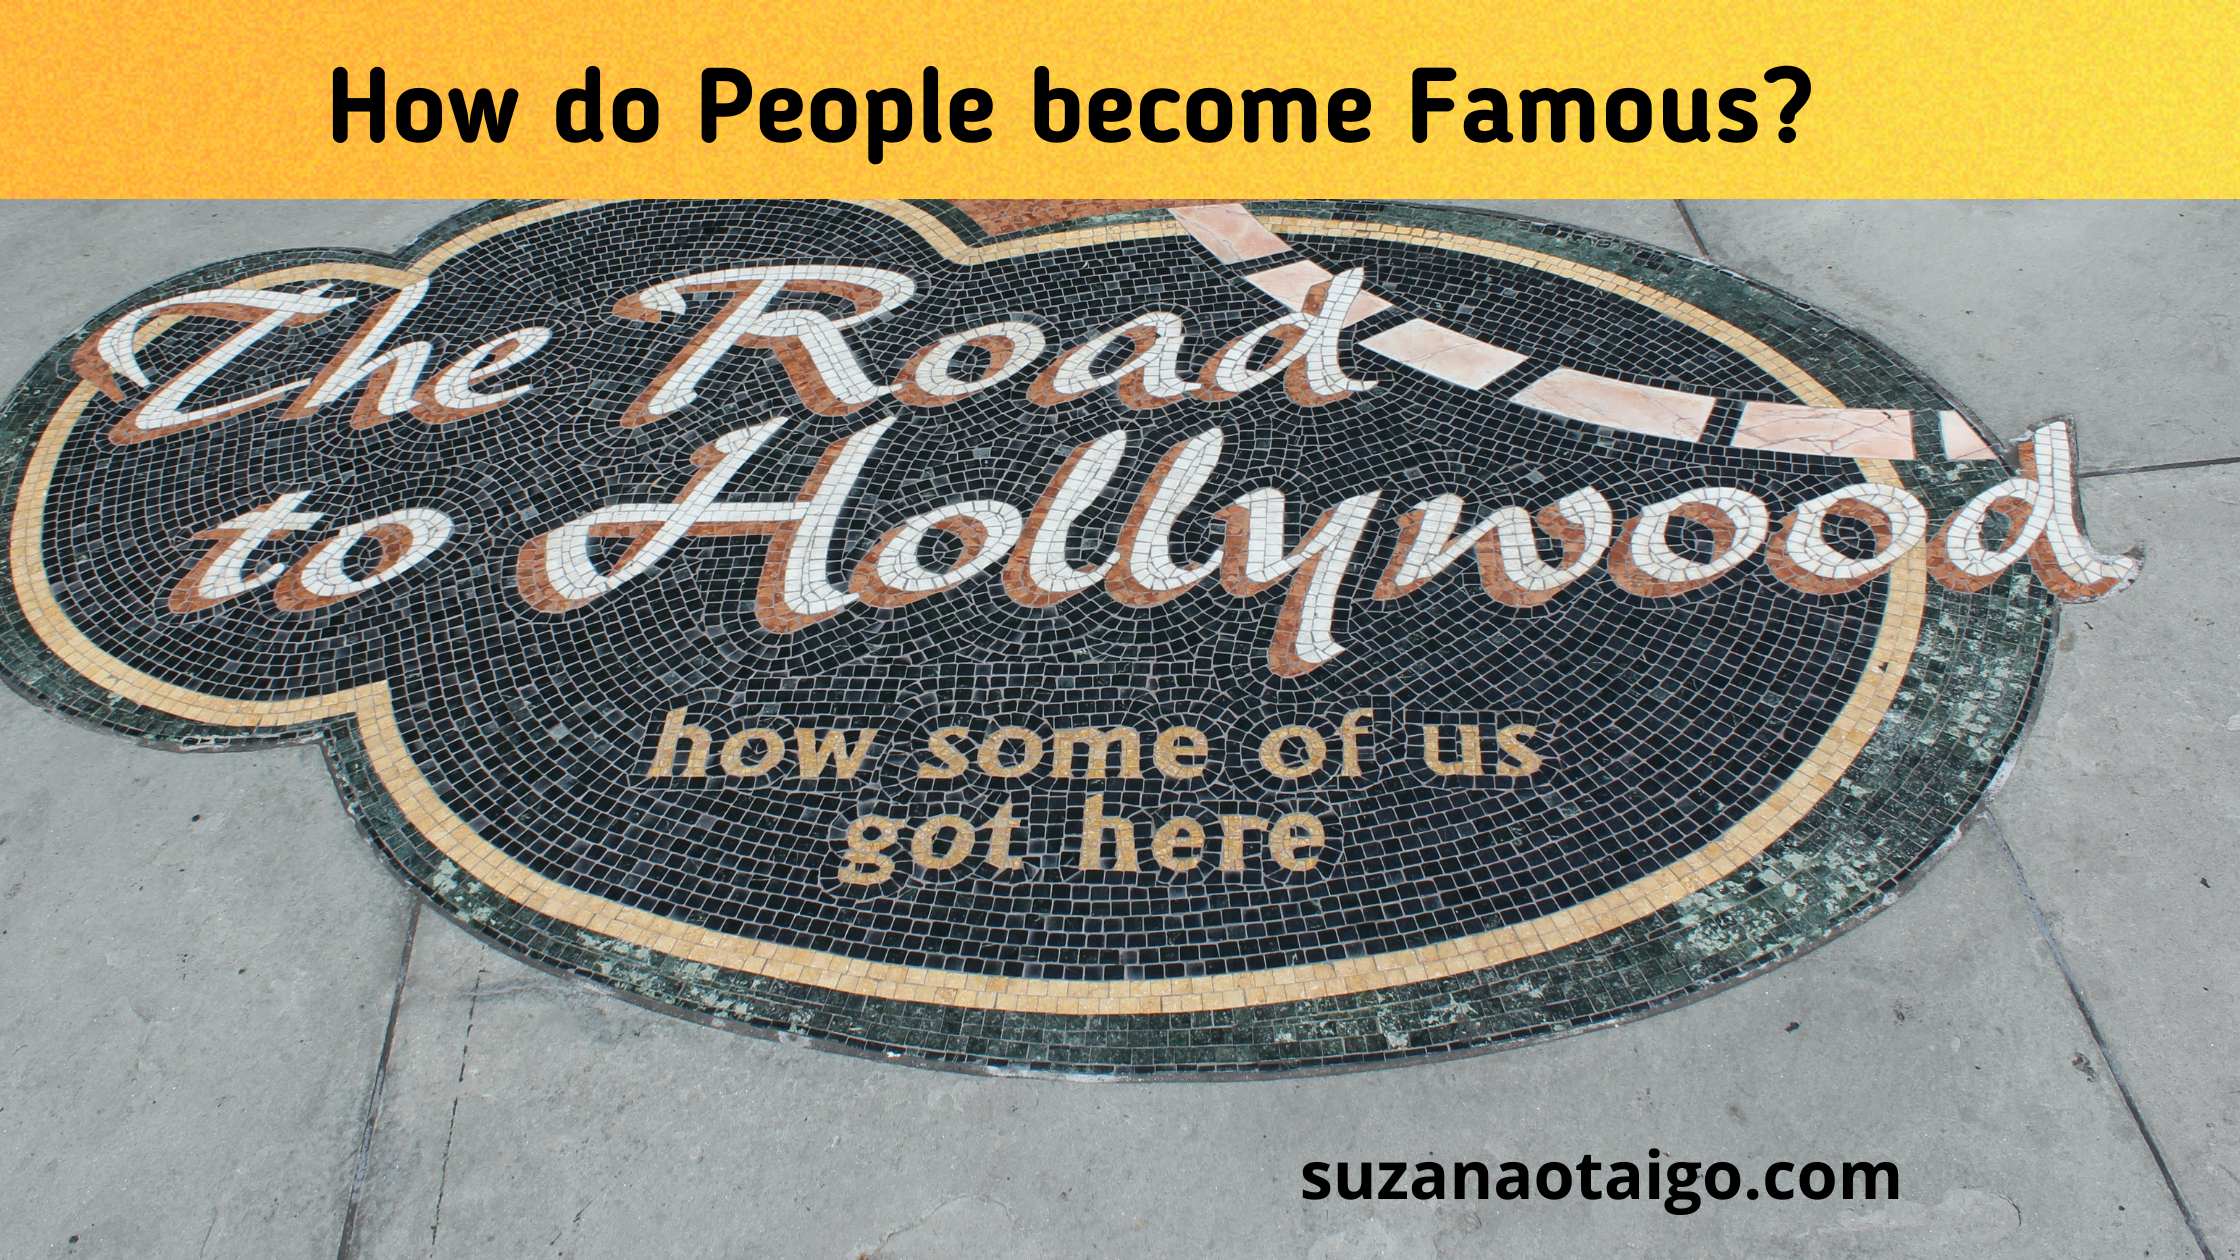 How Do People Become Famous?